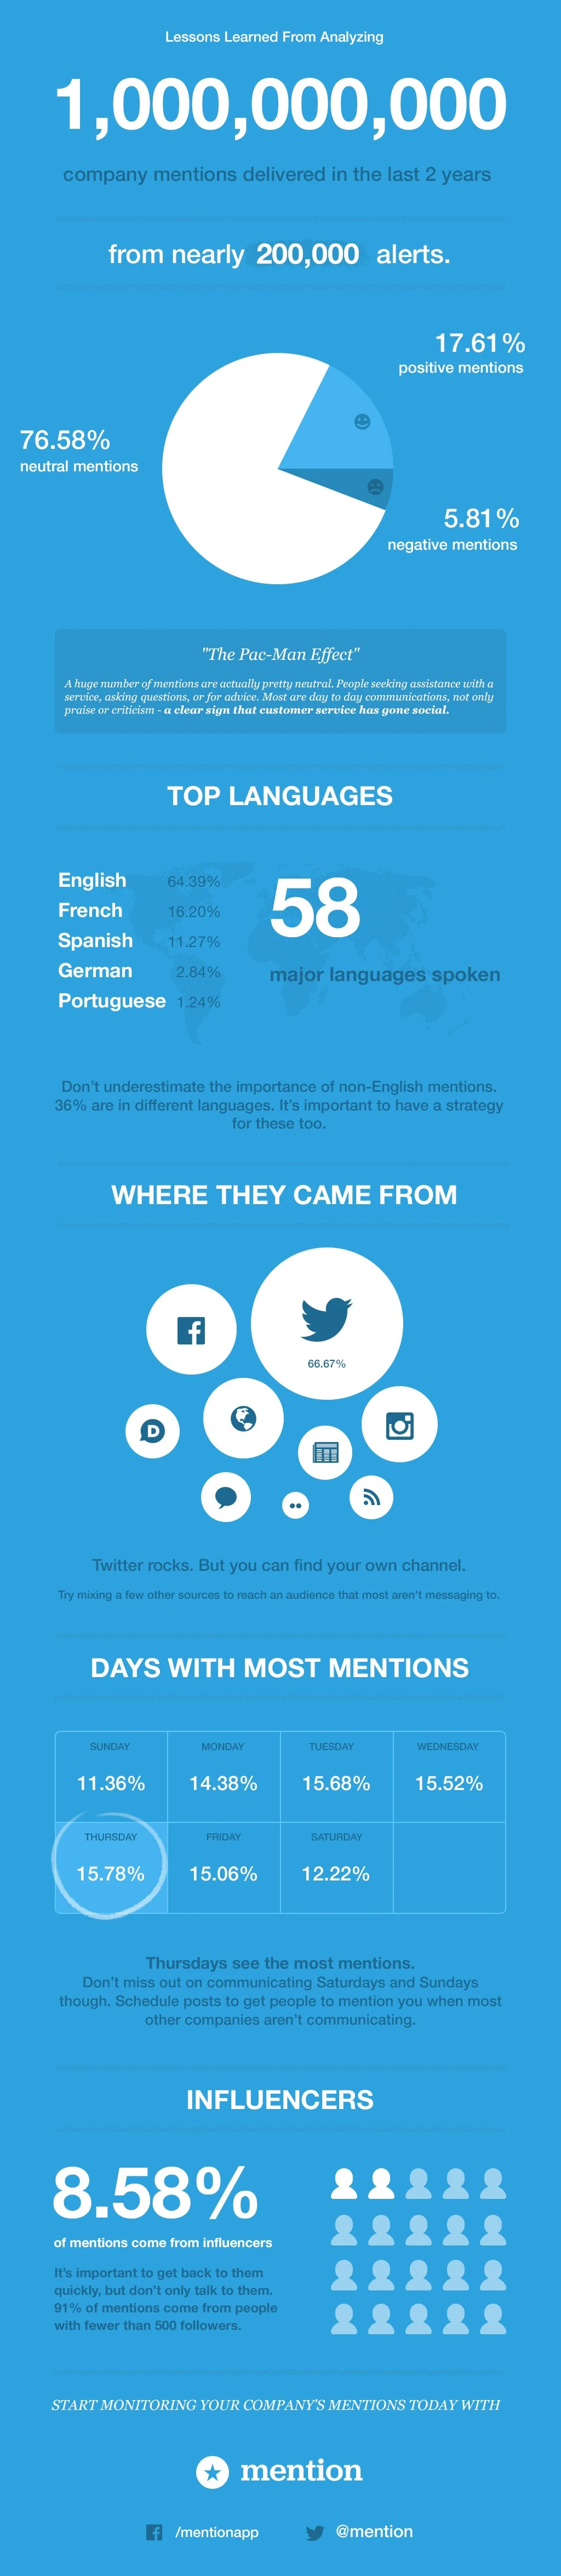 Lessons Learned From Analyzing 1,000,000,000 Company Mentions - #infographic